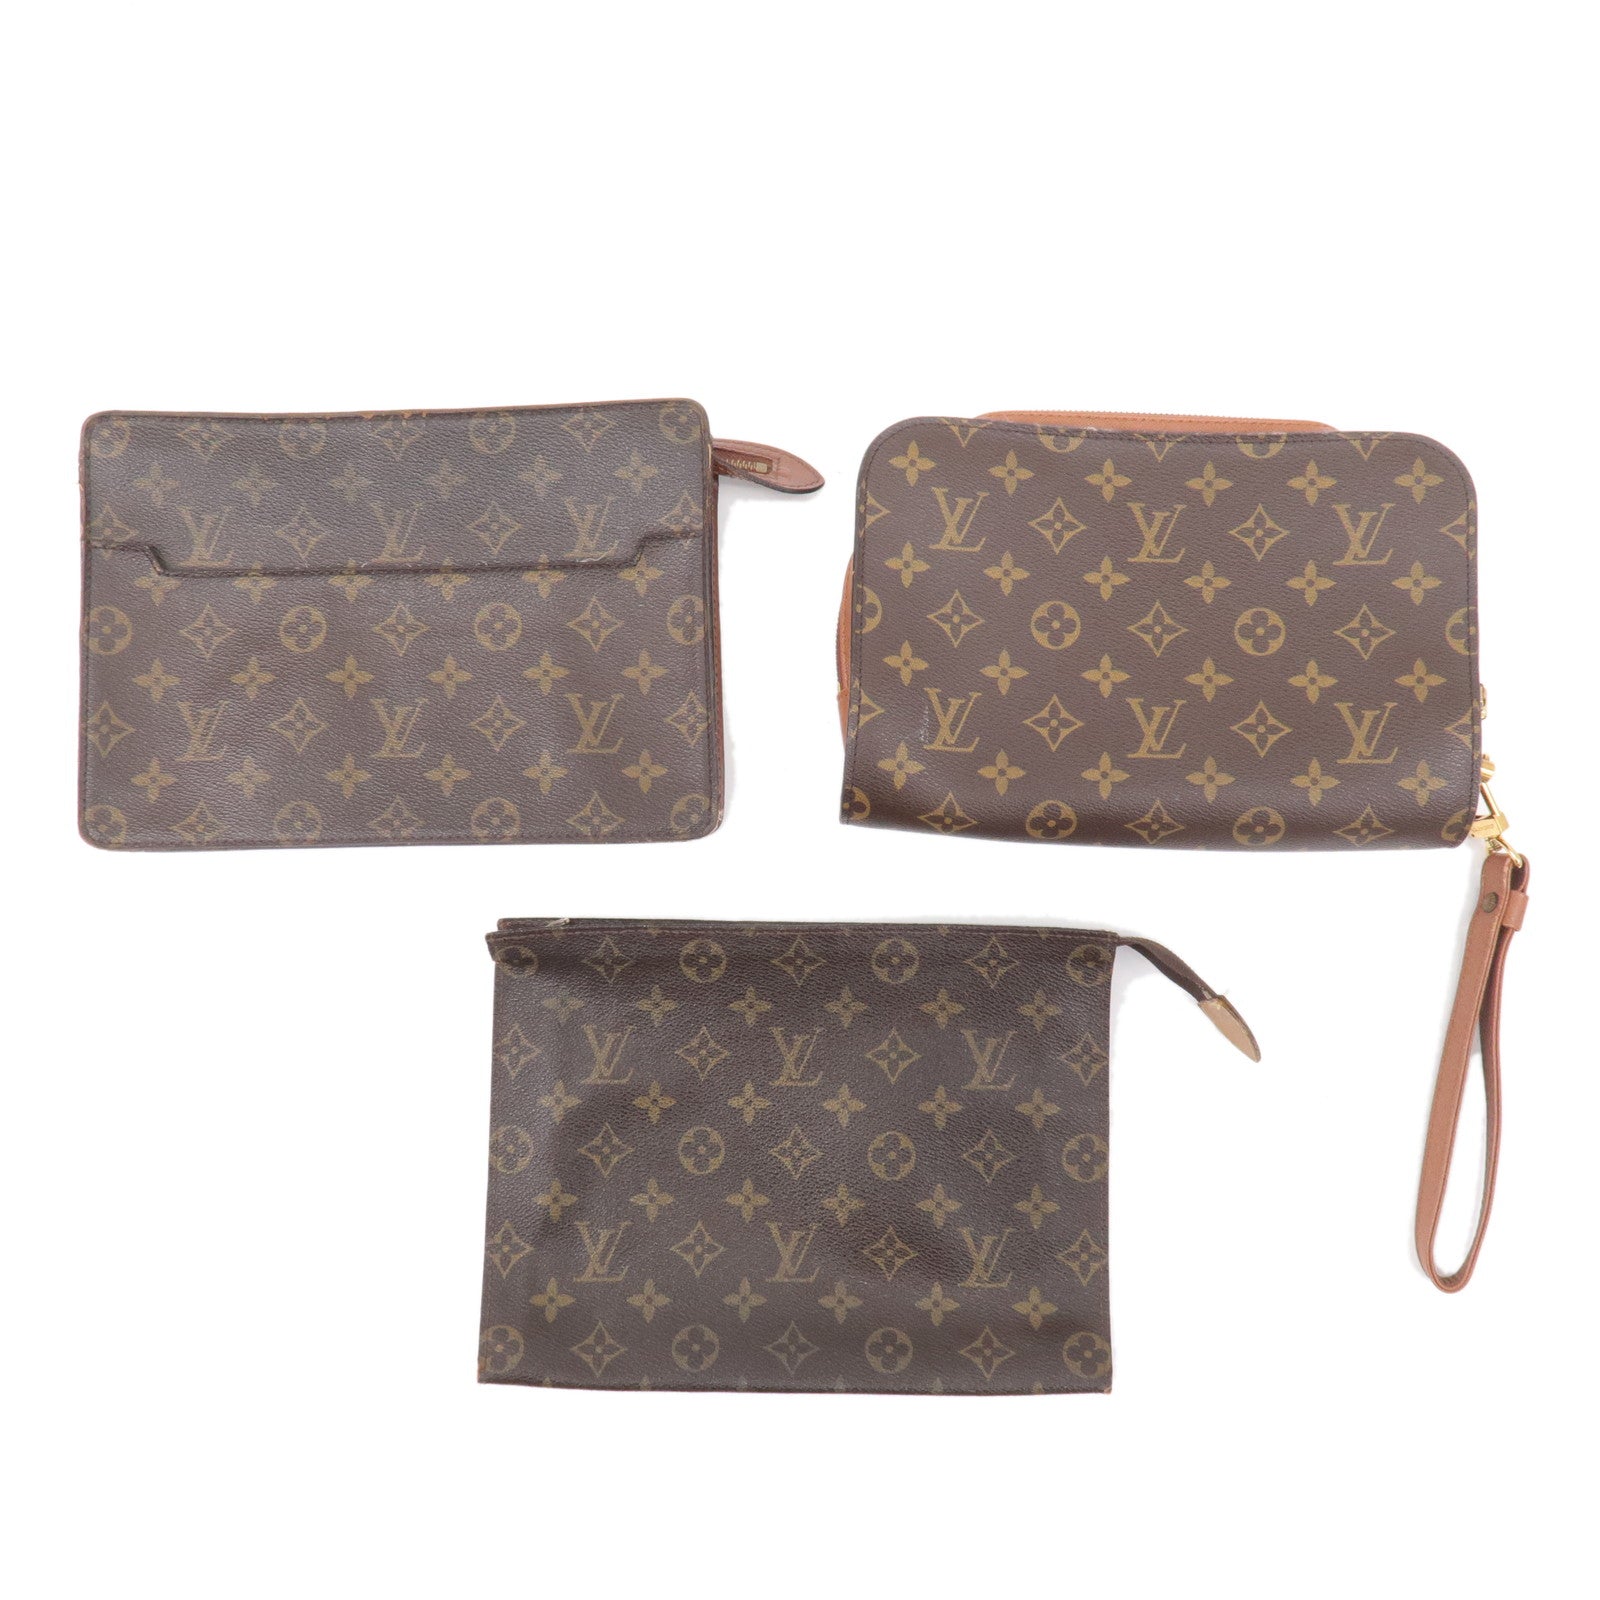 Vuitton - Orsay - Clutch - ep_vintage luxury Store - M51790 – dct